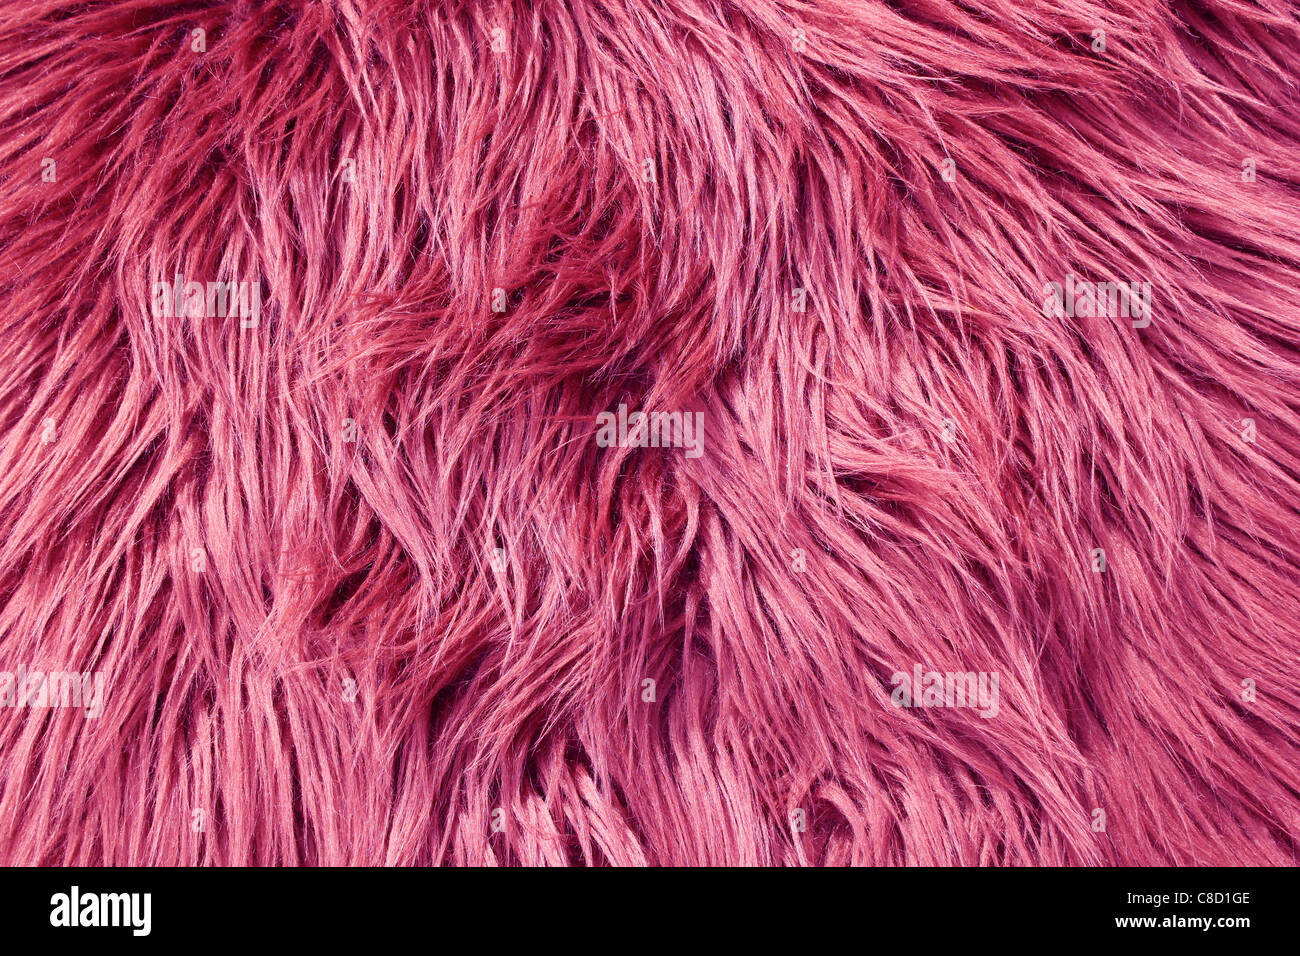 Close up of pink fluffy hair Stock Photo